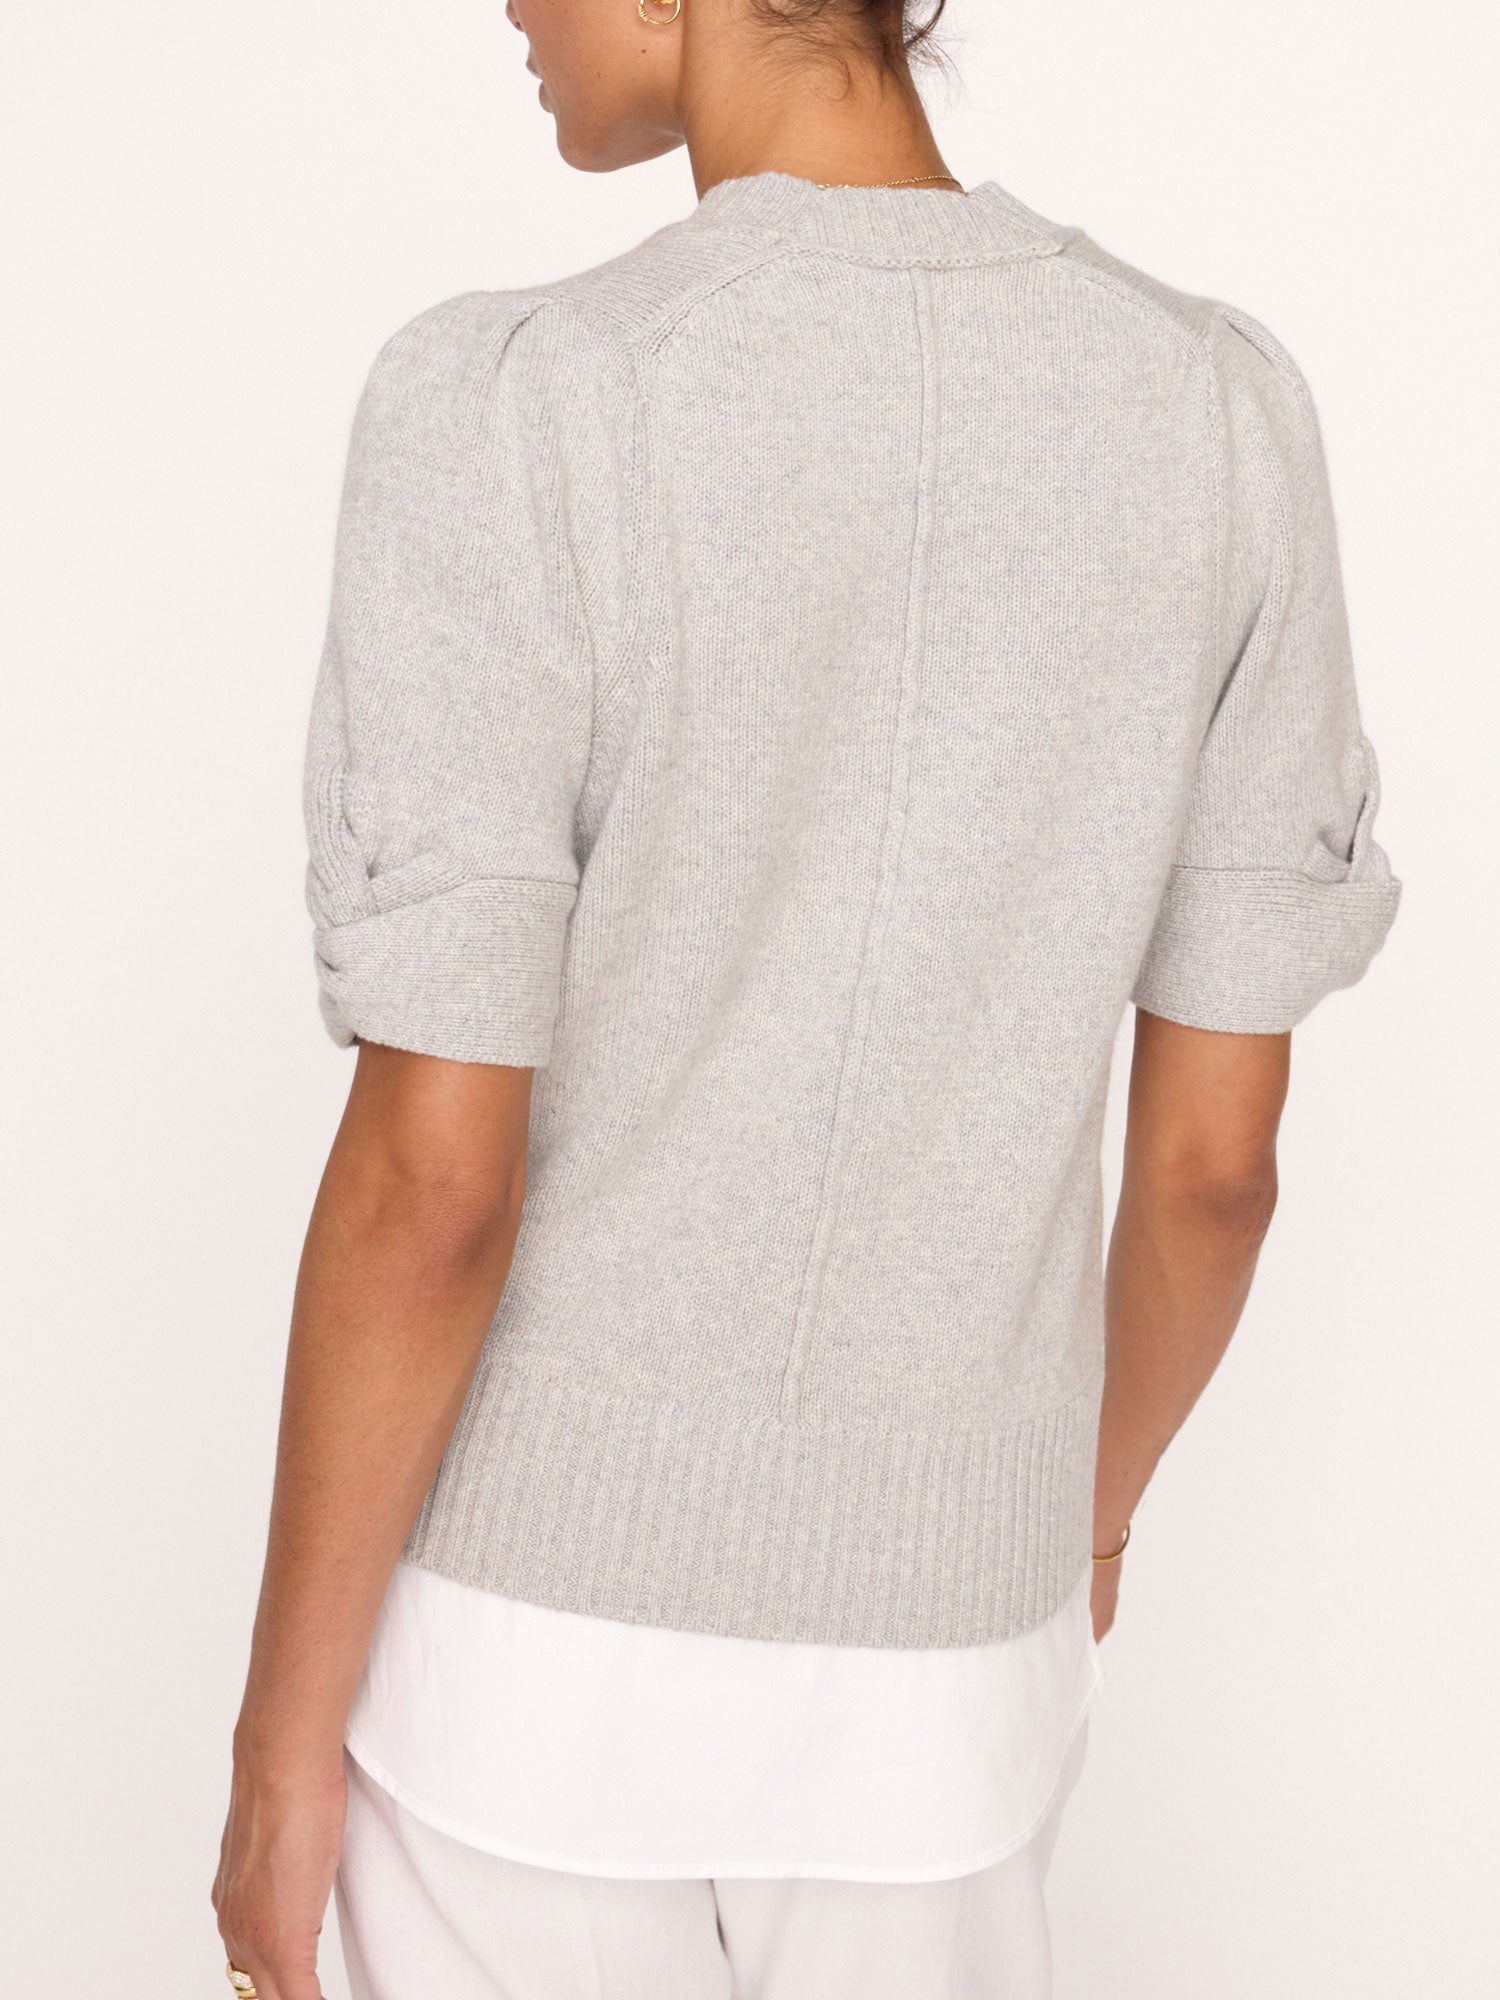 Emme layered knot sleeve crewneck grey sweater back view